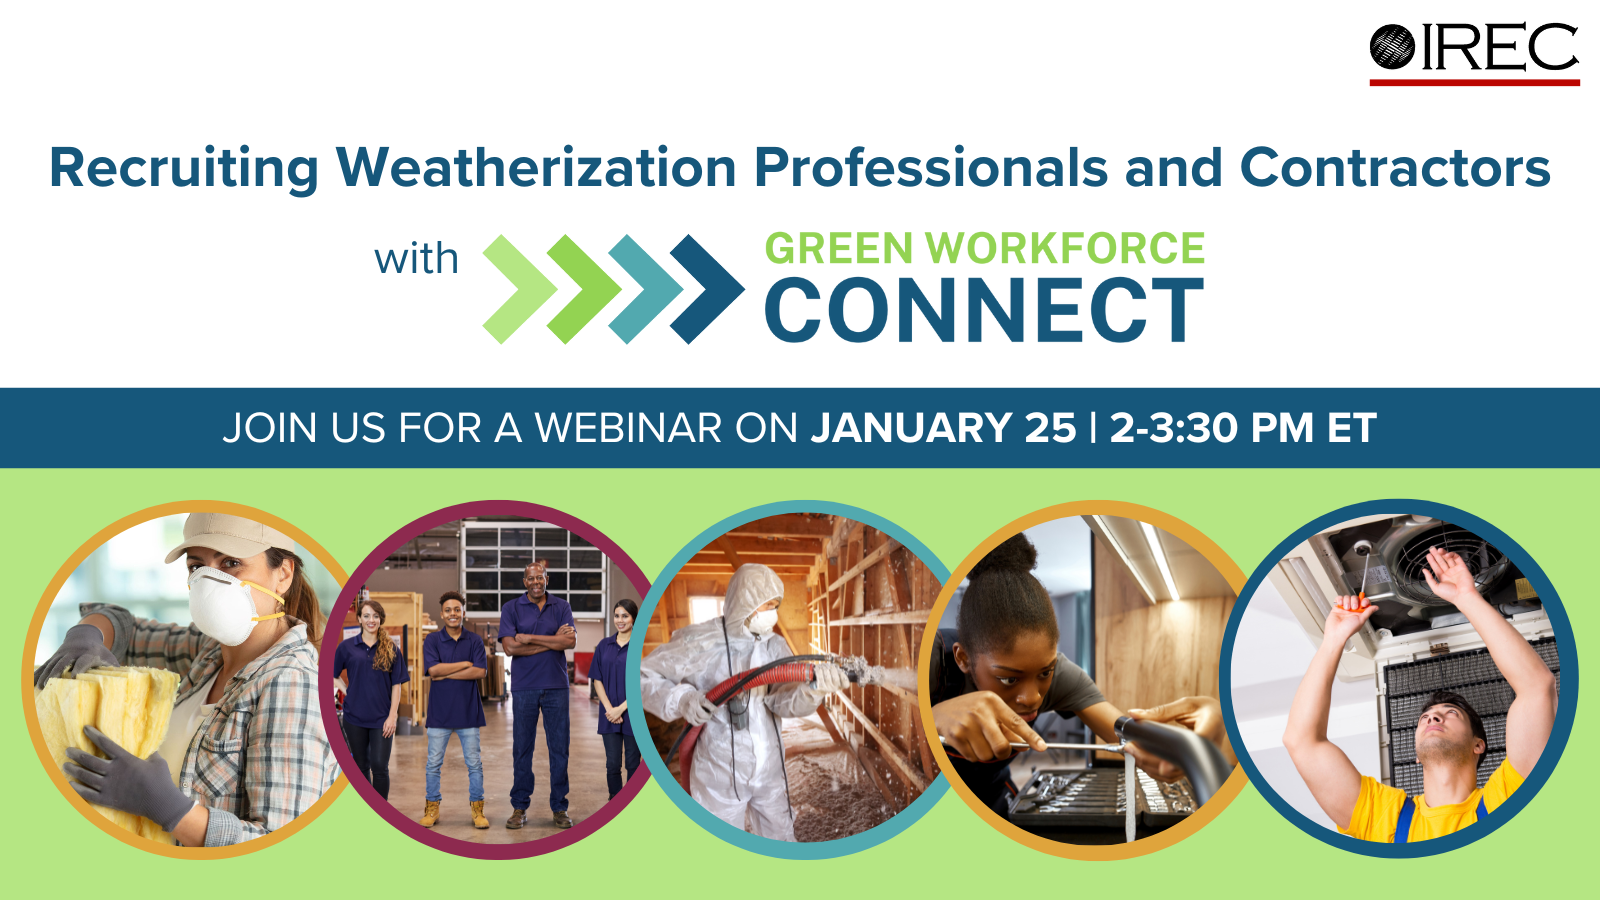 Webinar: Recruiting Weatherization Professionals and Contractors with Green Workforce Connect